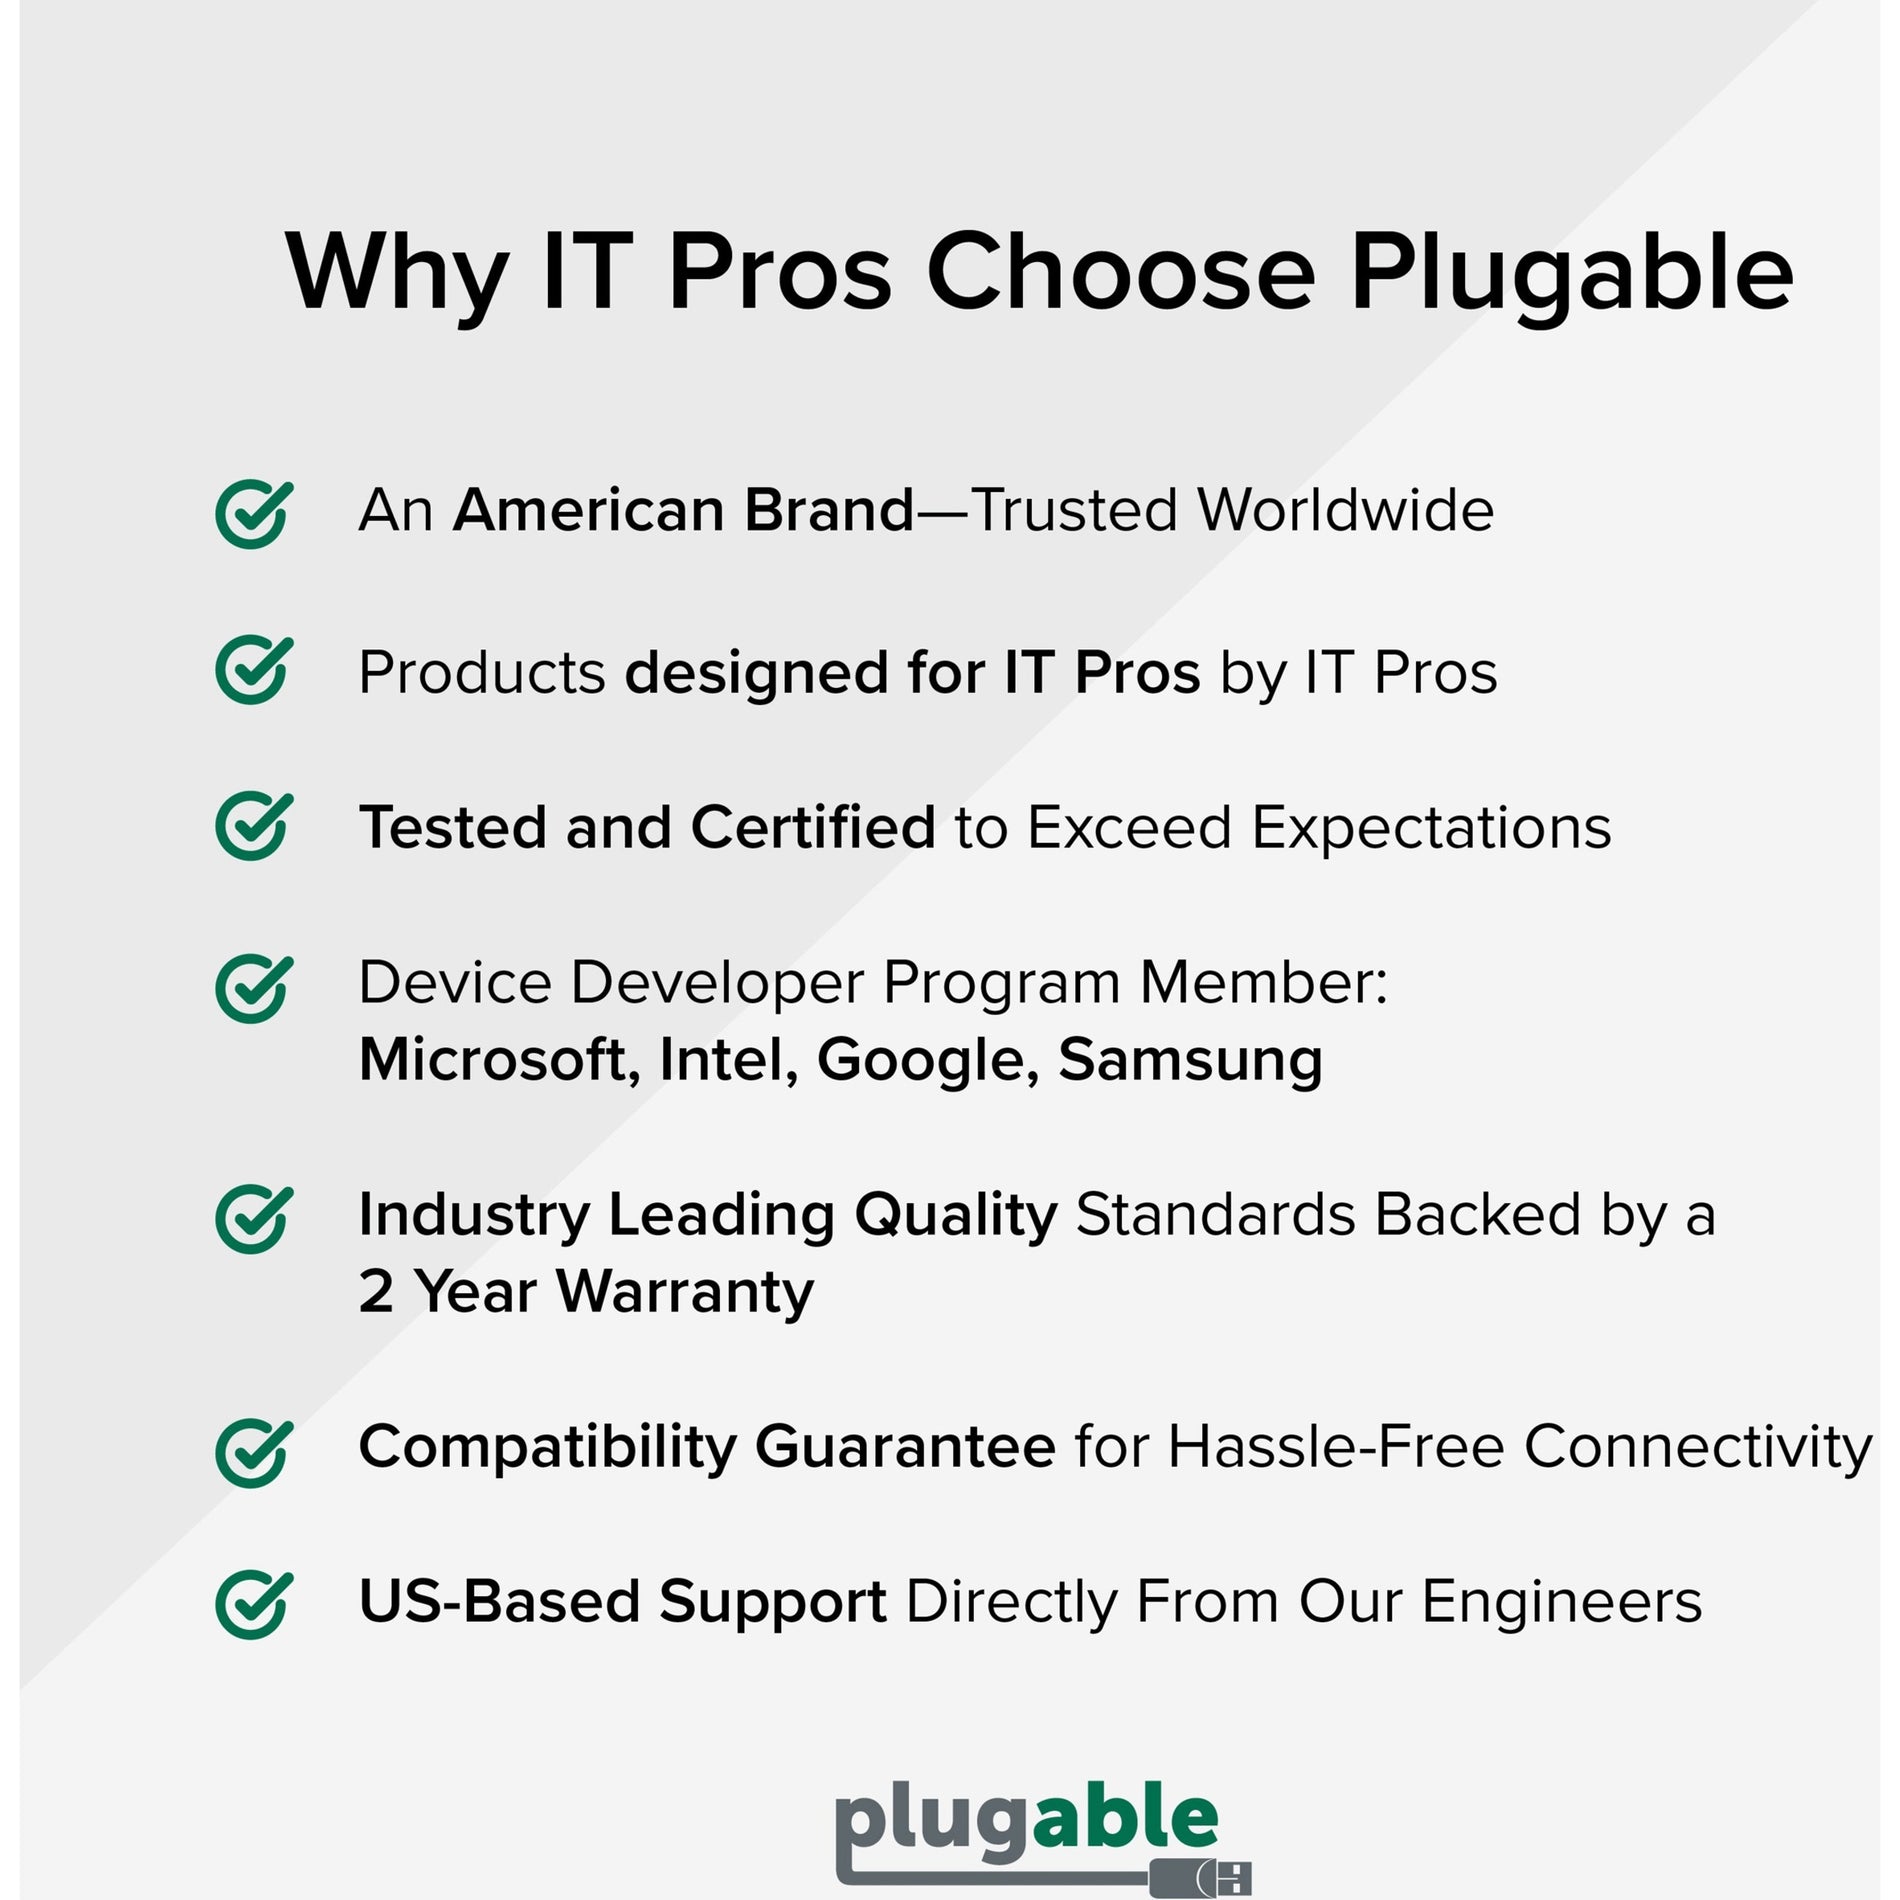 Plugable USBC-6950U USB 3.0 and USB-C 4K DisplayPort and HDMI Dual Monitor Adapter, Connect Multiple Monitors with Ease